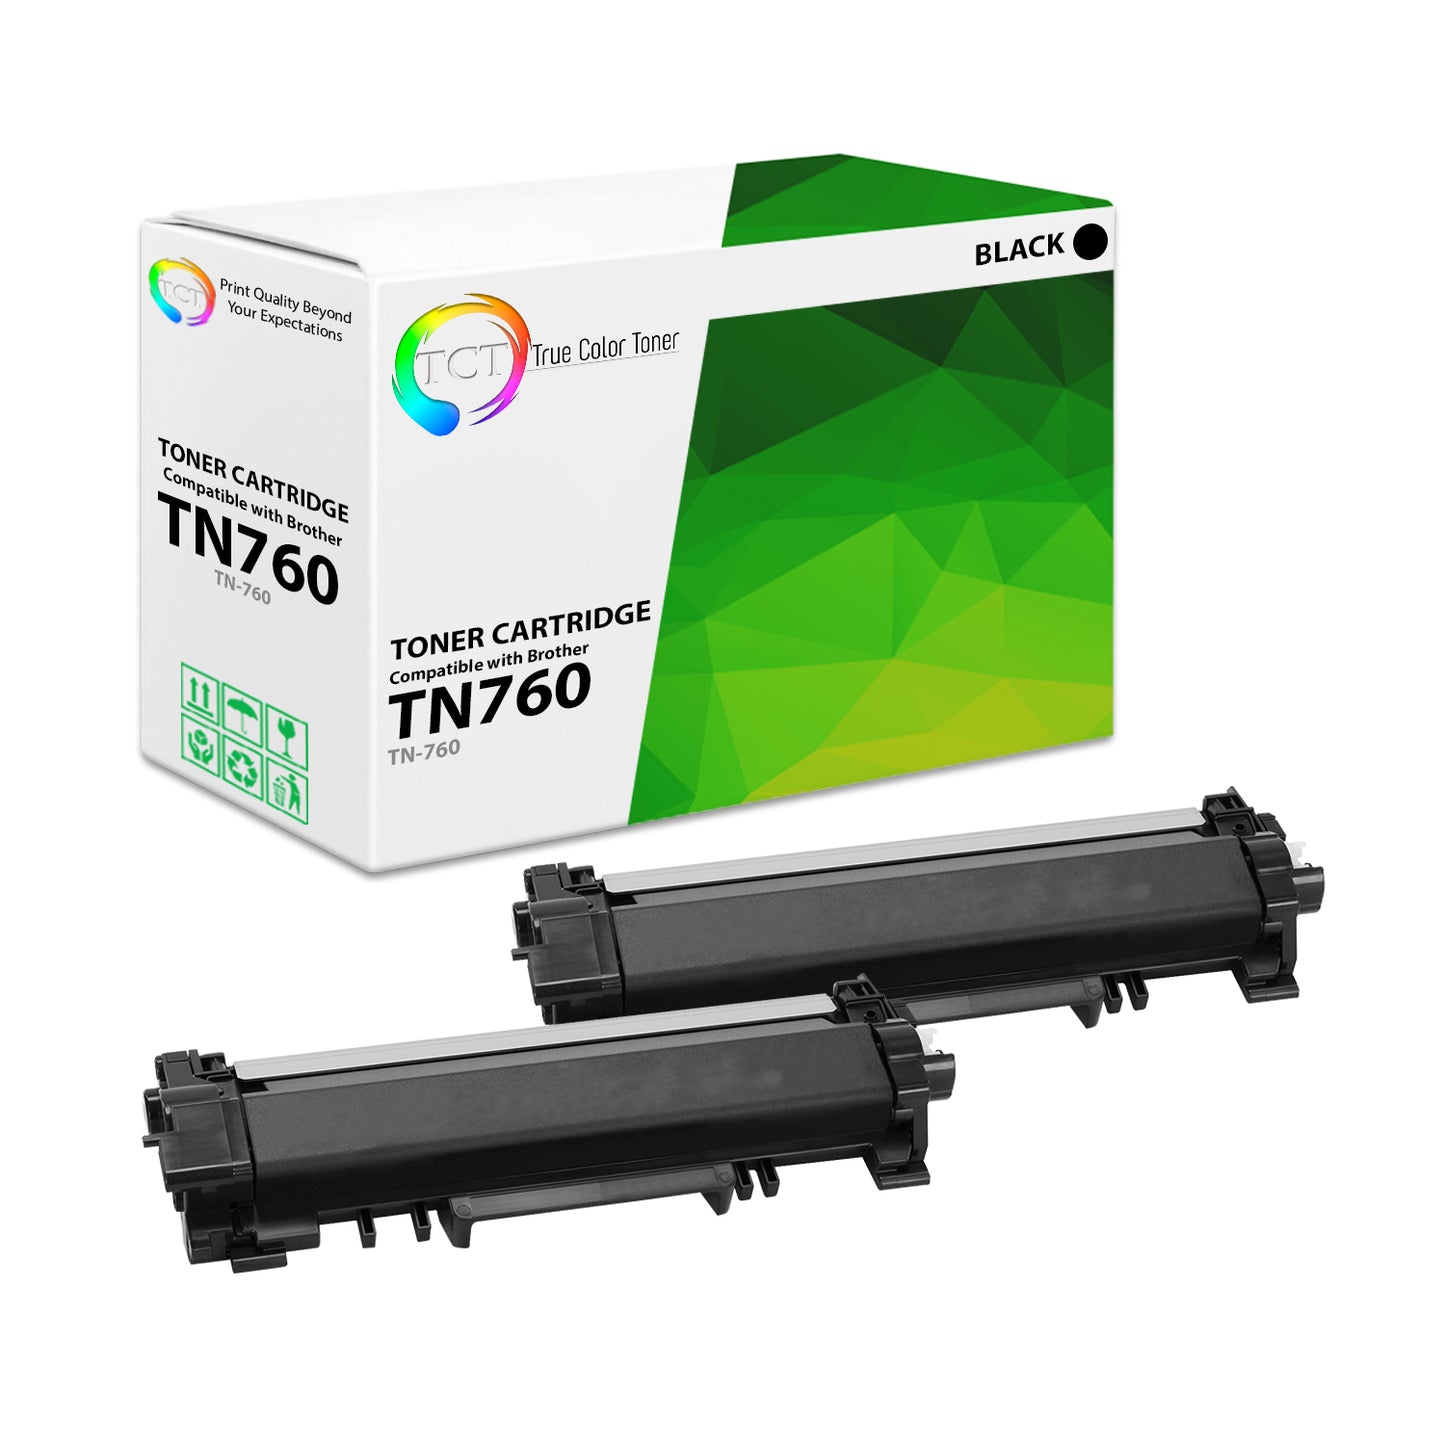 TCT Compatible High Yield Toner Cartridge Replacement for the Brother TN760 Series - 2 Pack Black